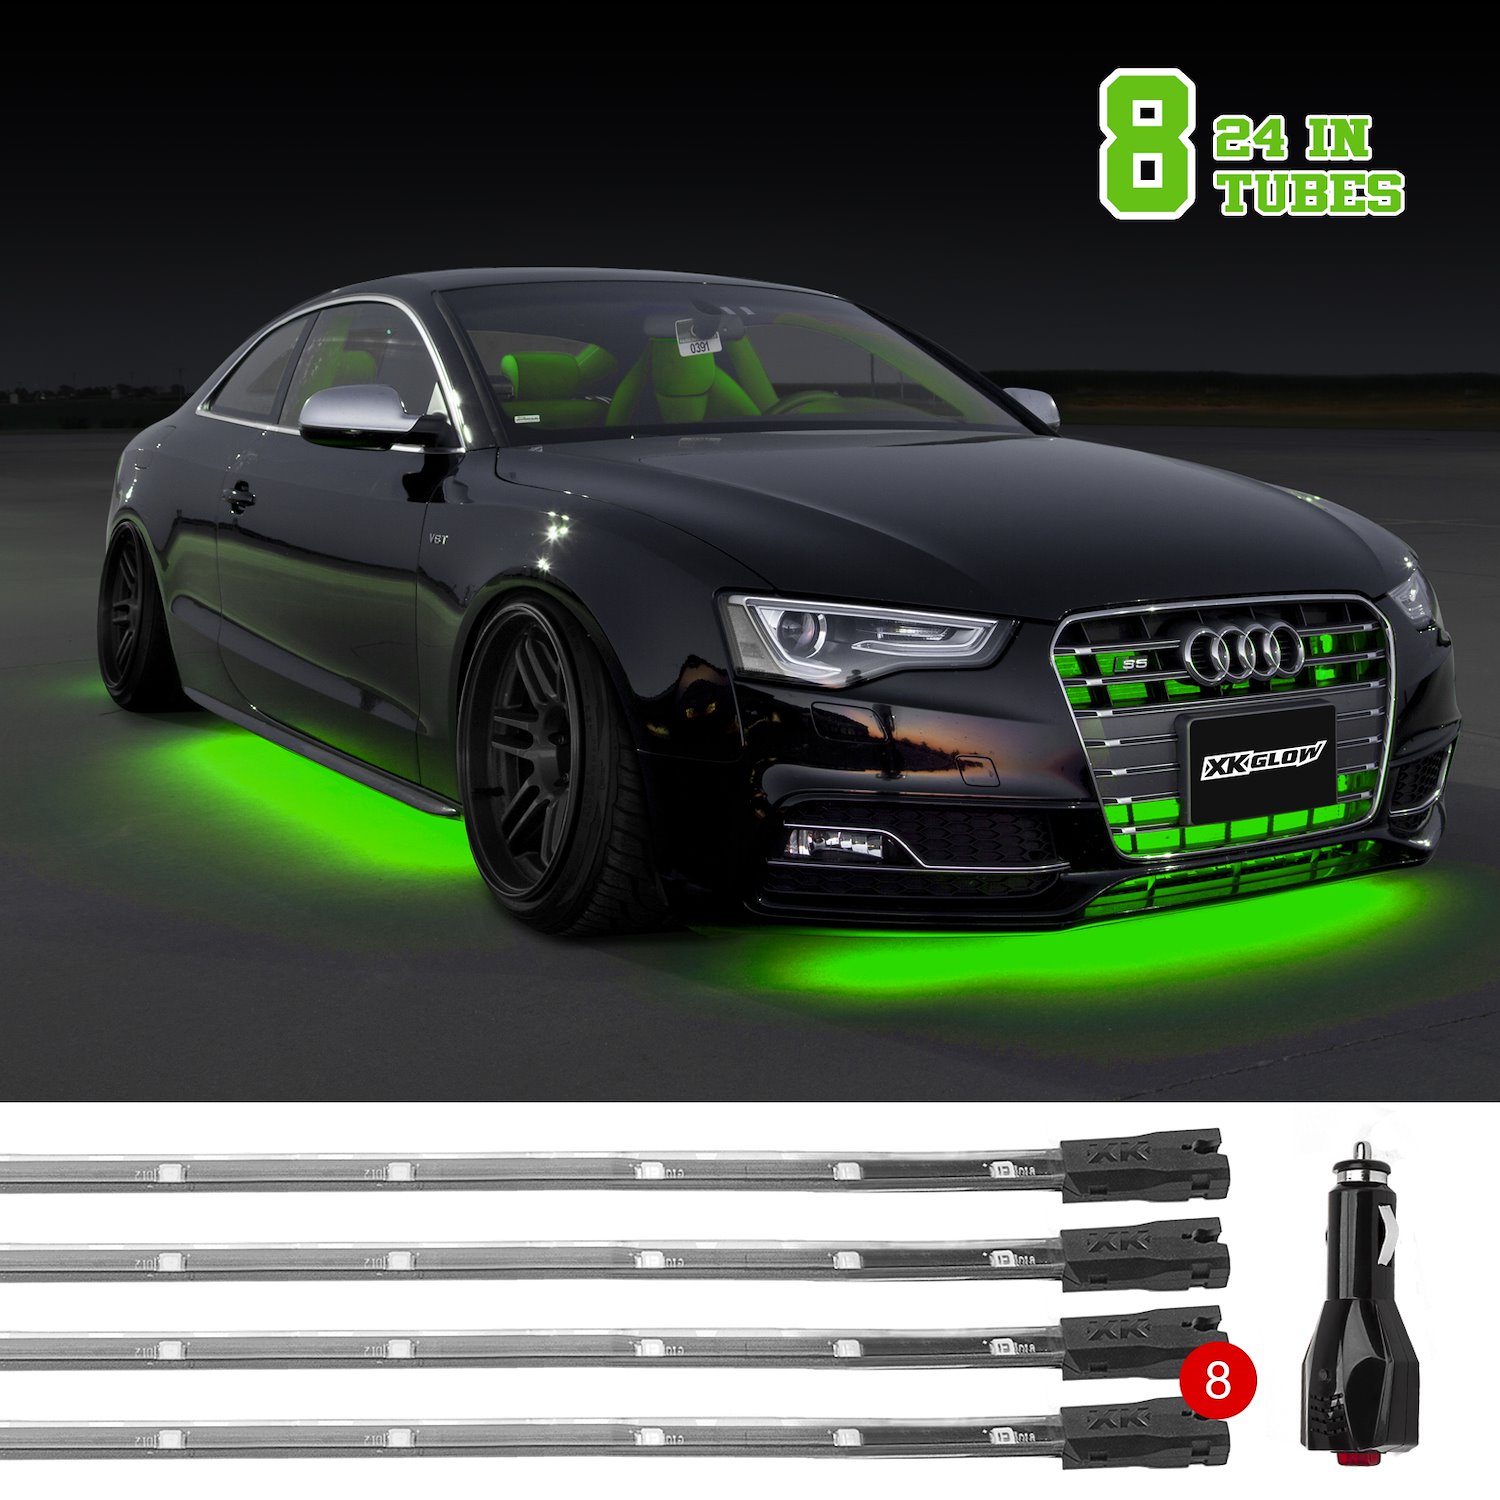 XK041002-G 8 x 24 in. Tube XKGLOW UnderglowLED Accent Light Car/Truck Kit, Sinlge-Color Green, Universal Fit